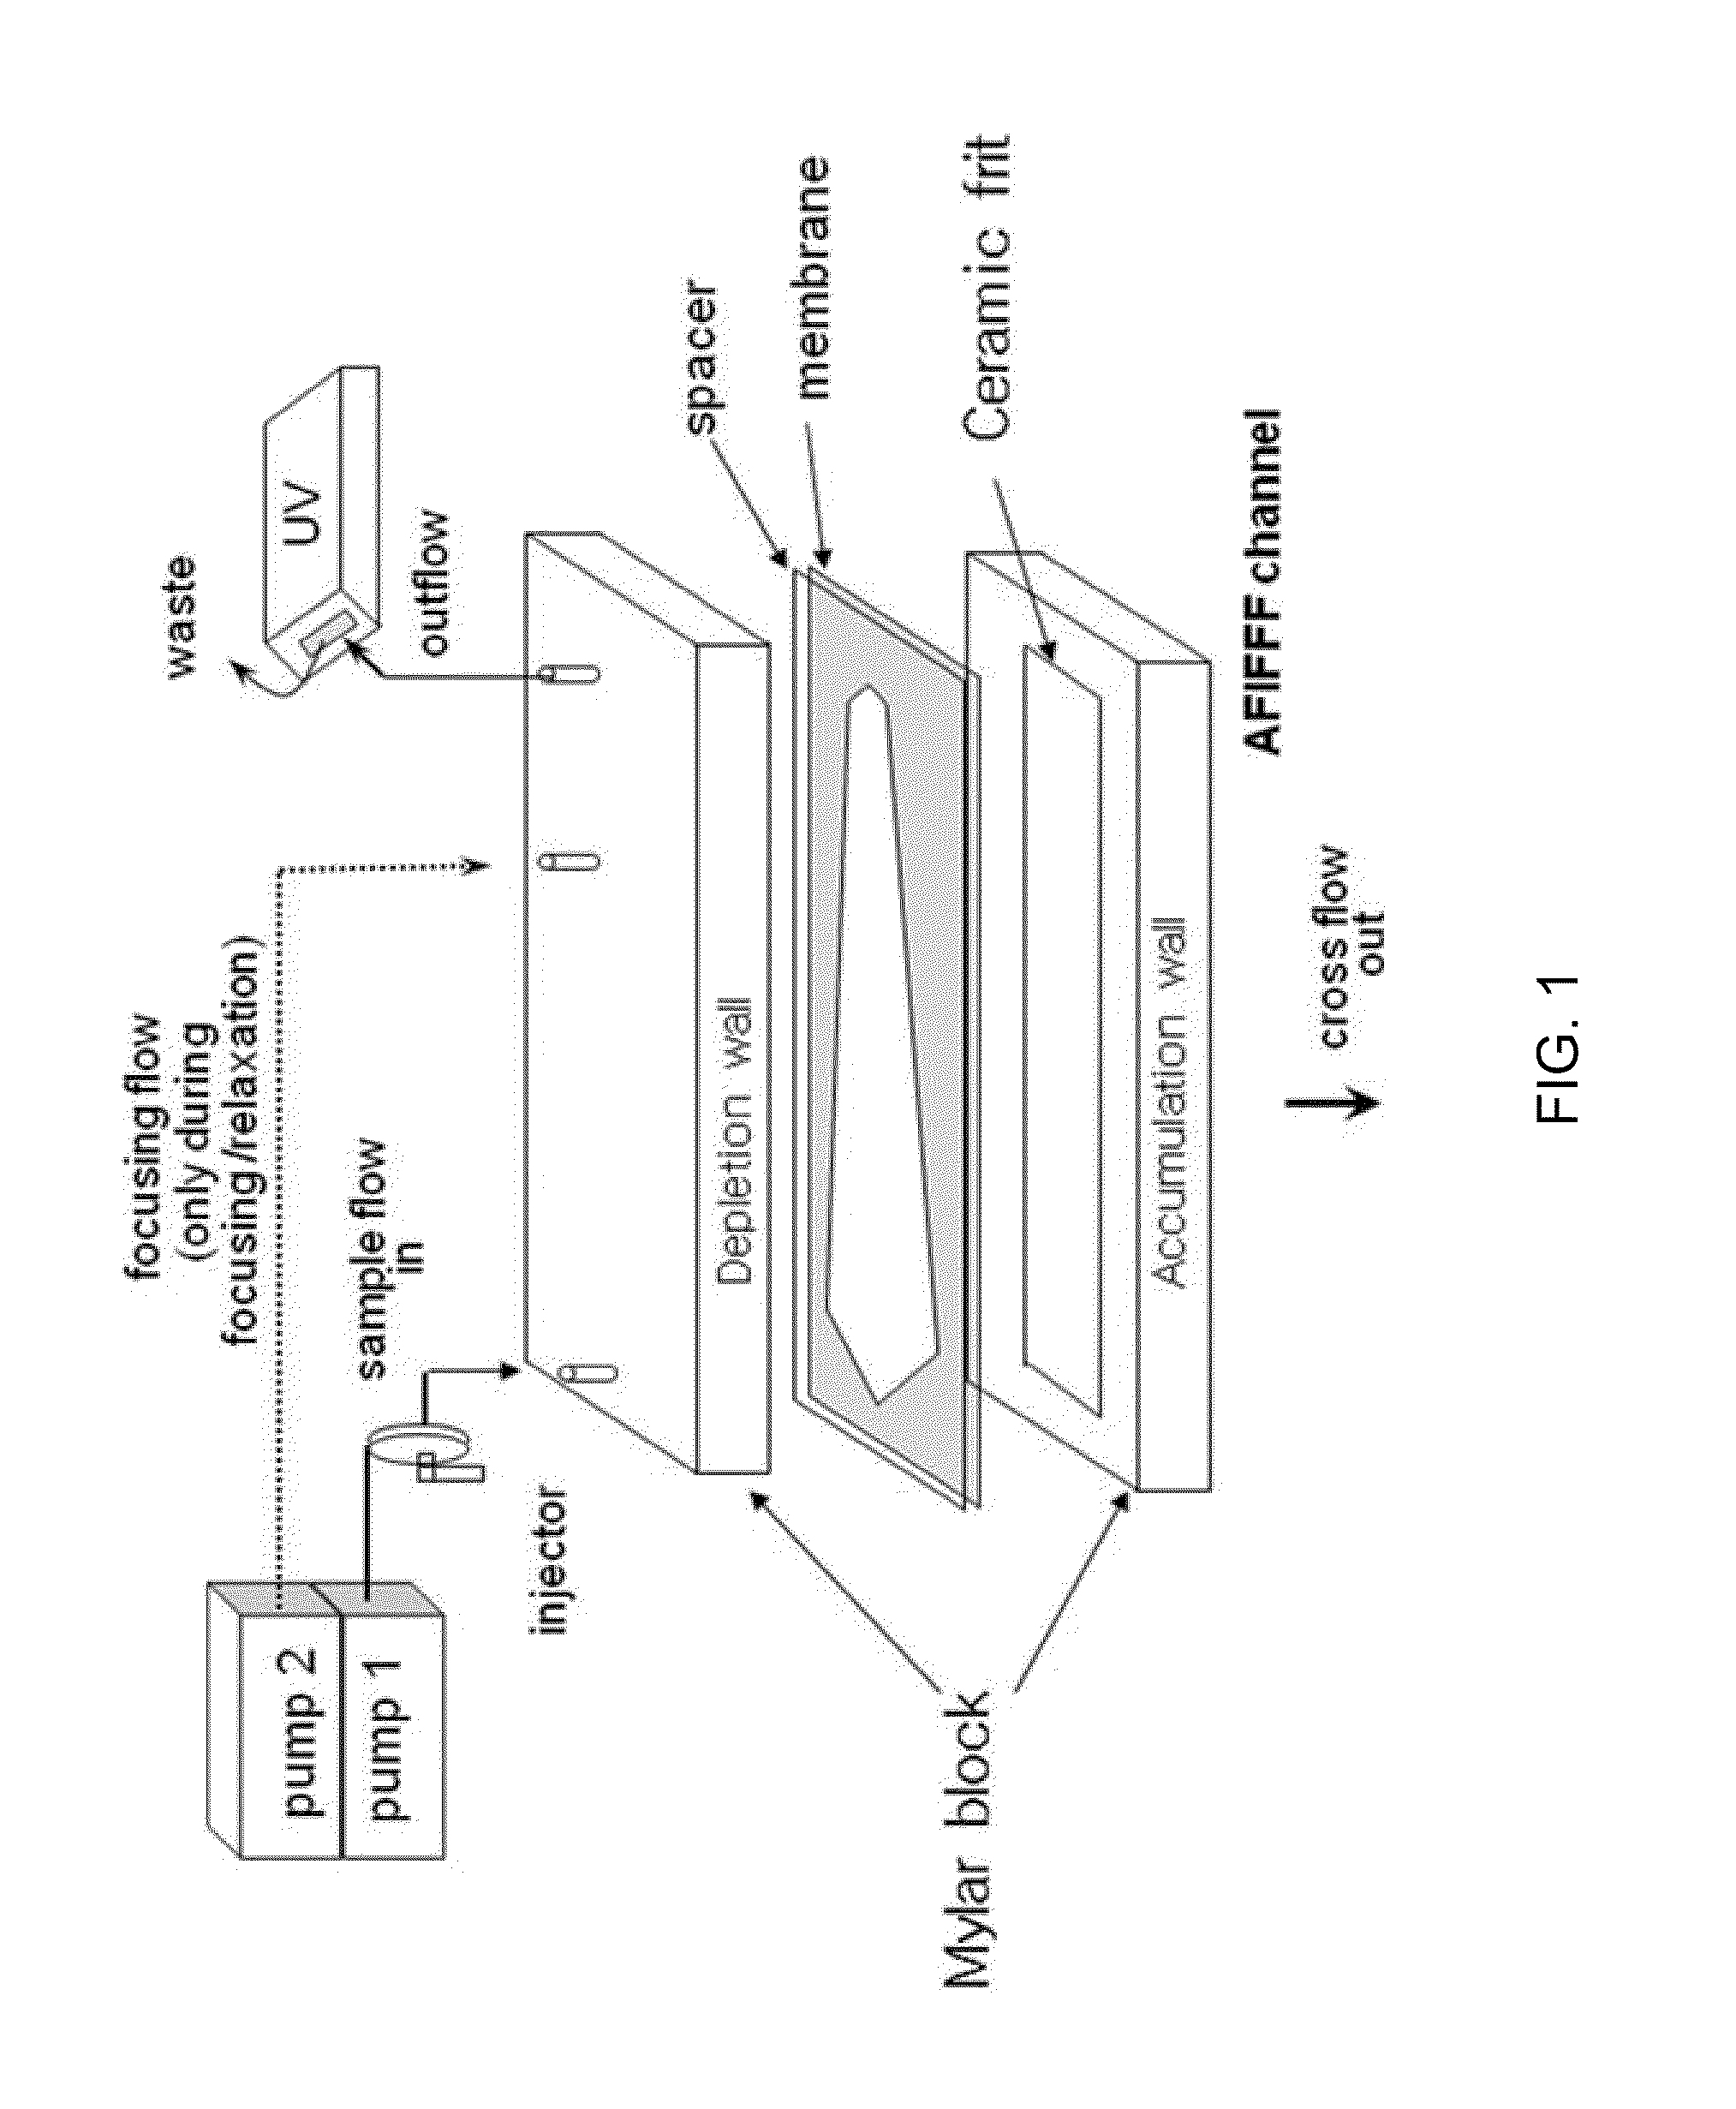 Non-gel based two-dimensional protein separation multi-channel devices